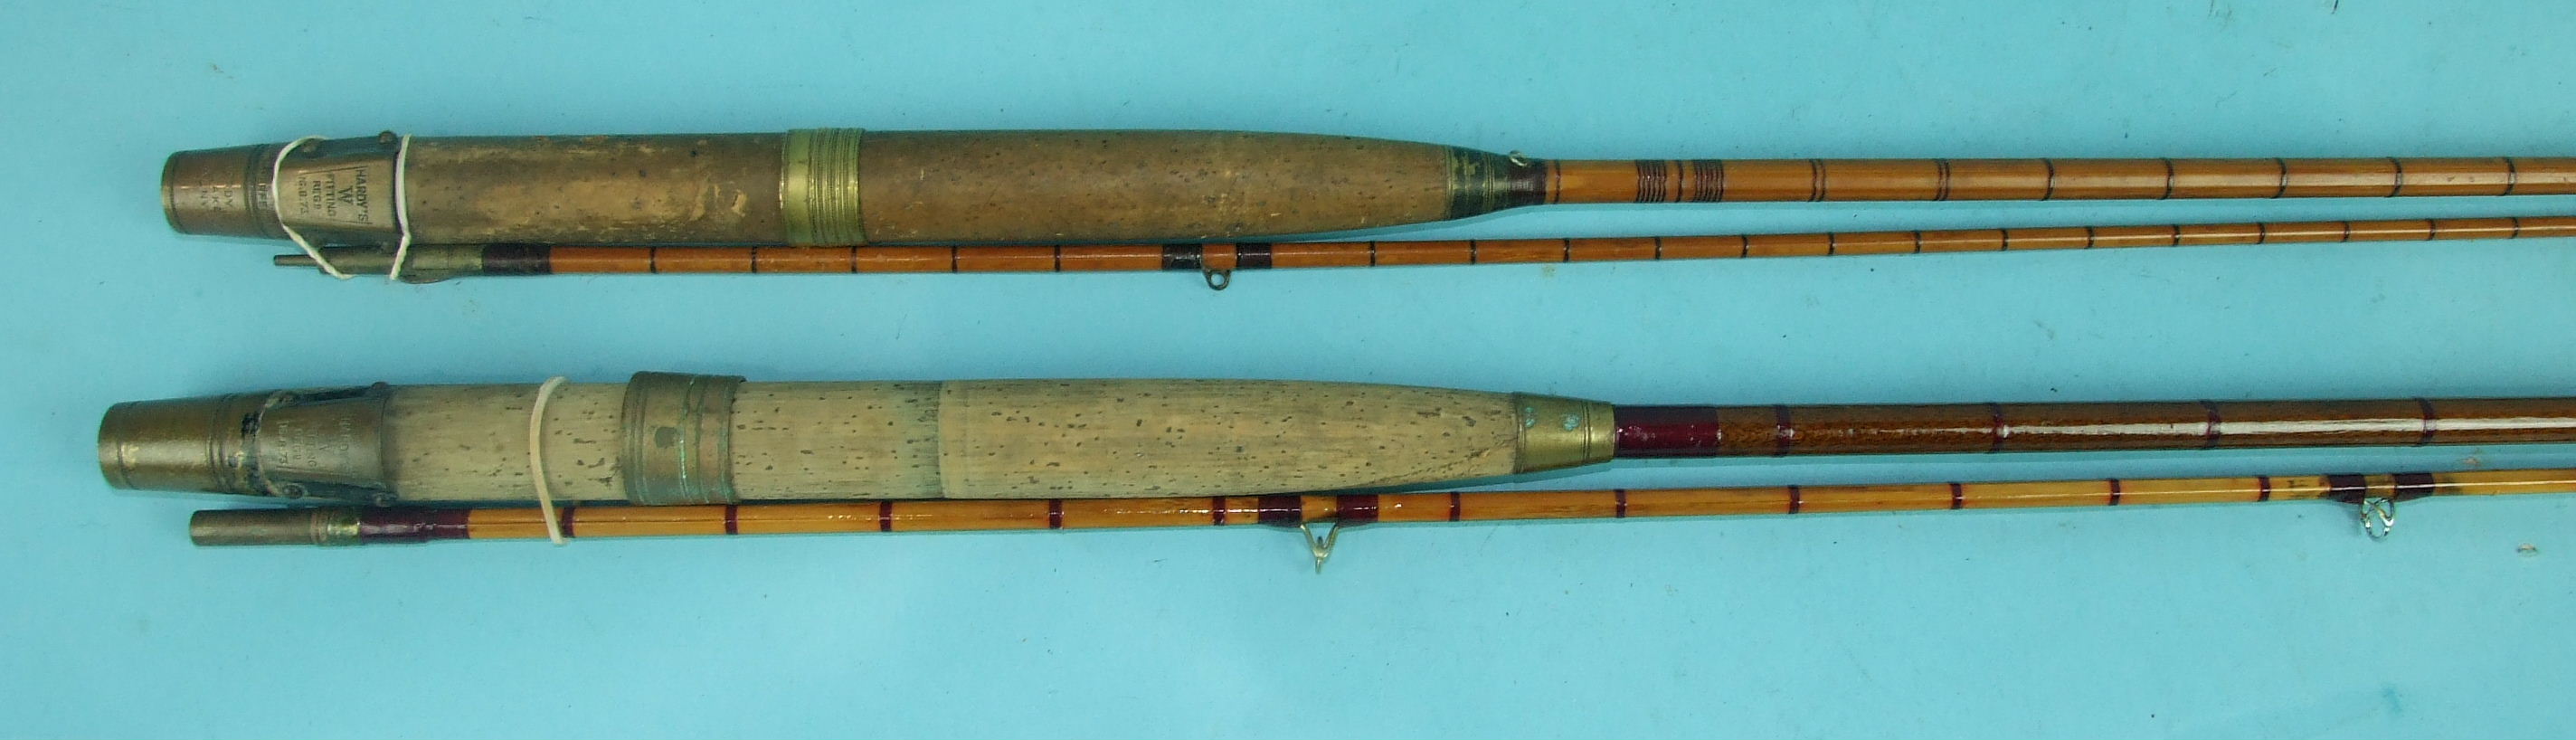 A vintage Hardy 9ft 6-inch 2-piece split-cane fly rod "The Perfection", with bronzed W rod fitting